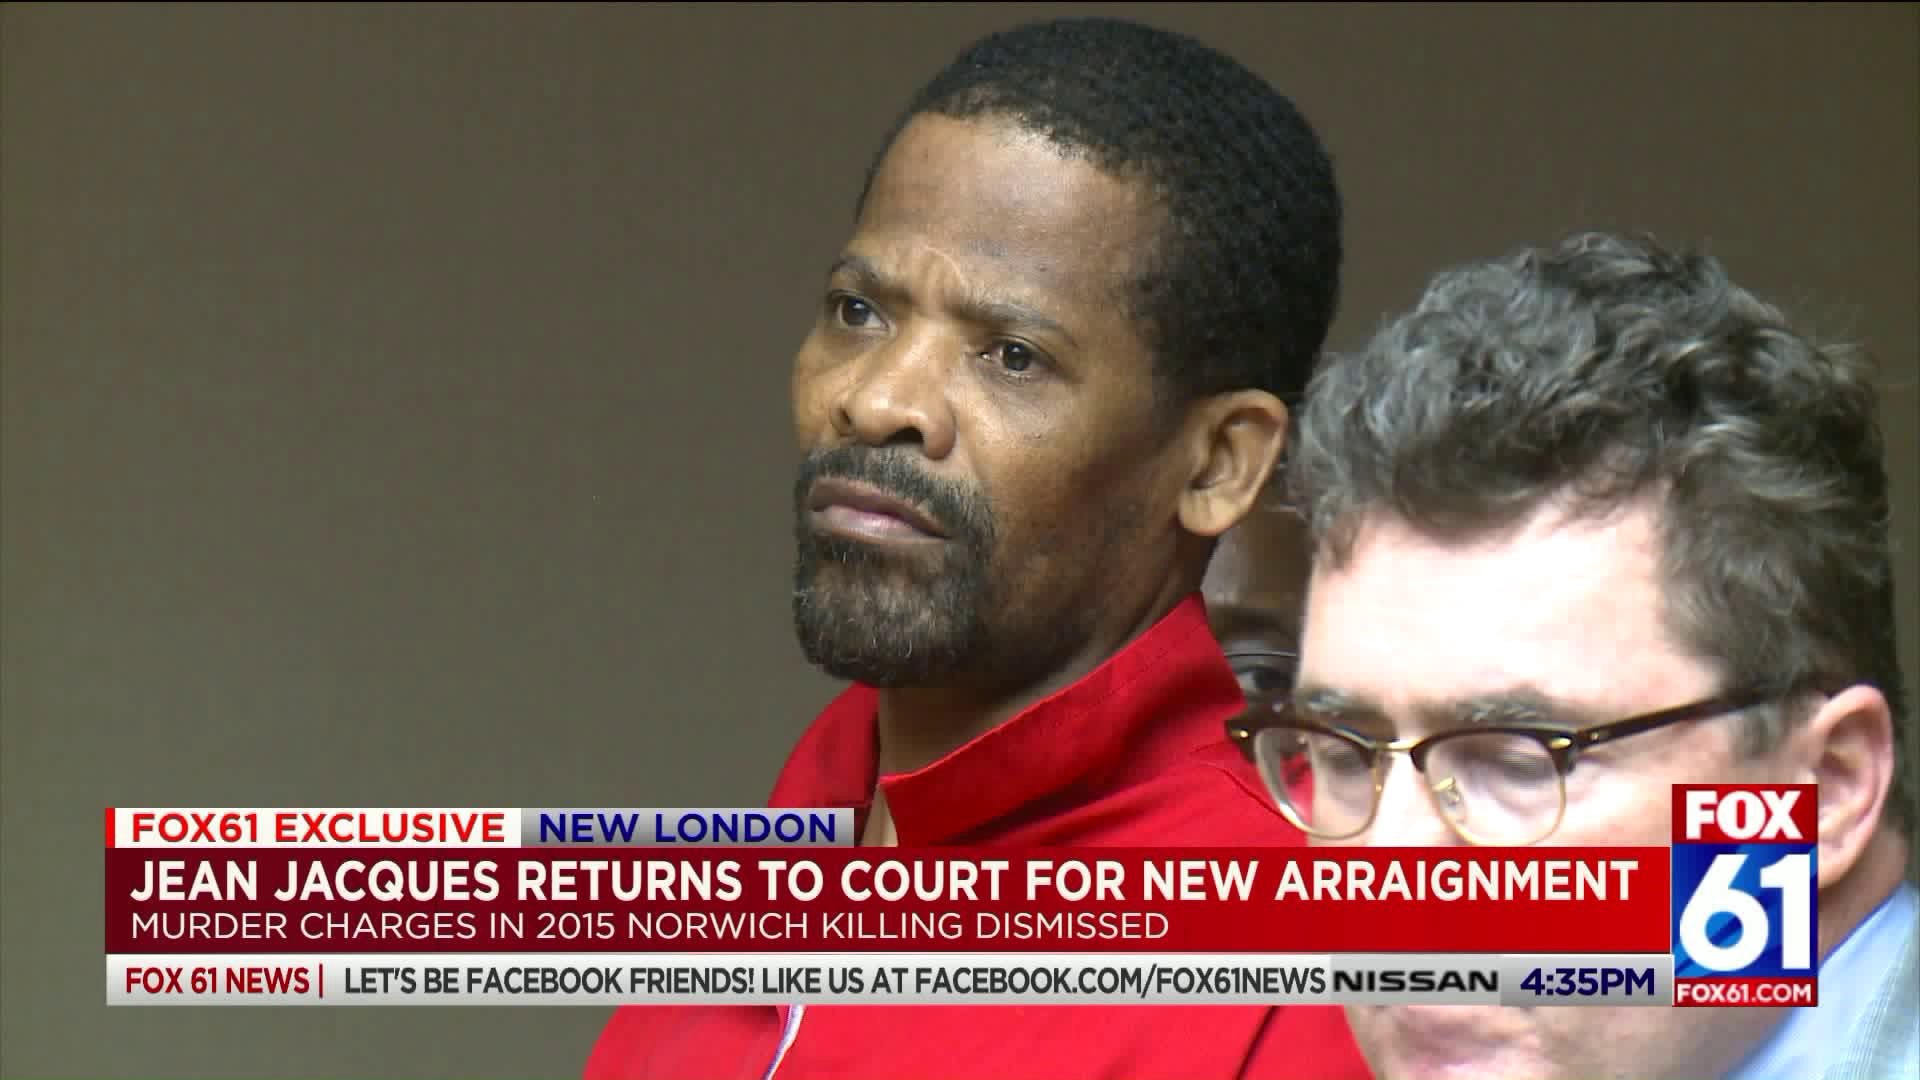 EXCLUSIVE: Jean Jacques re-arraigned on murder charges